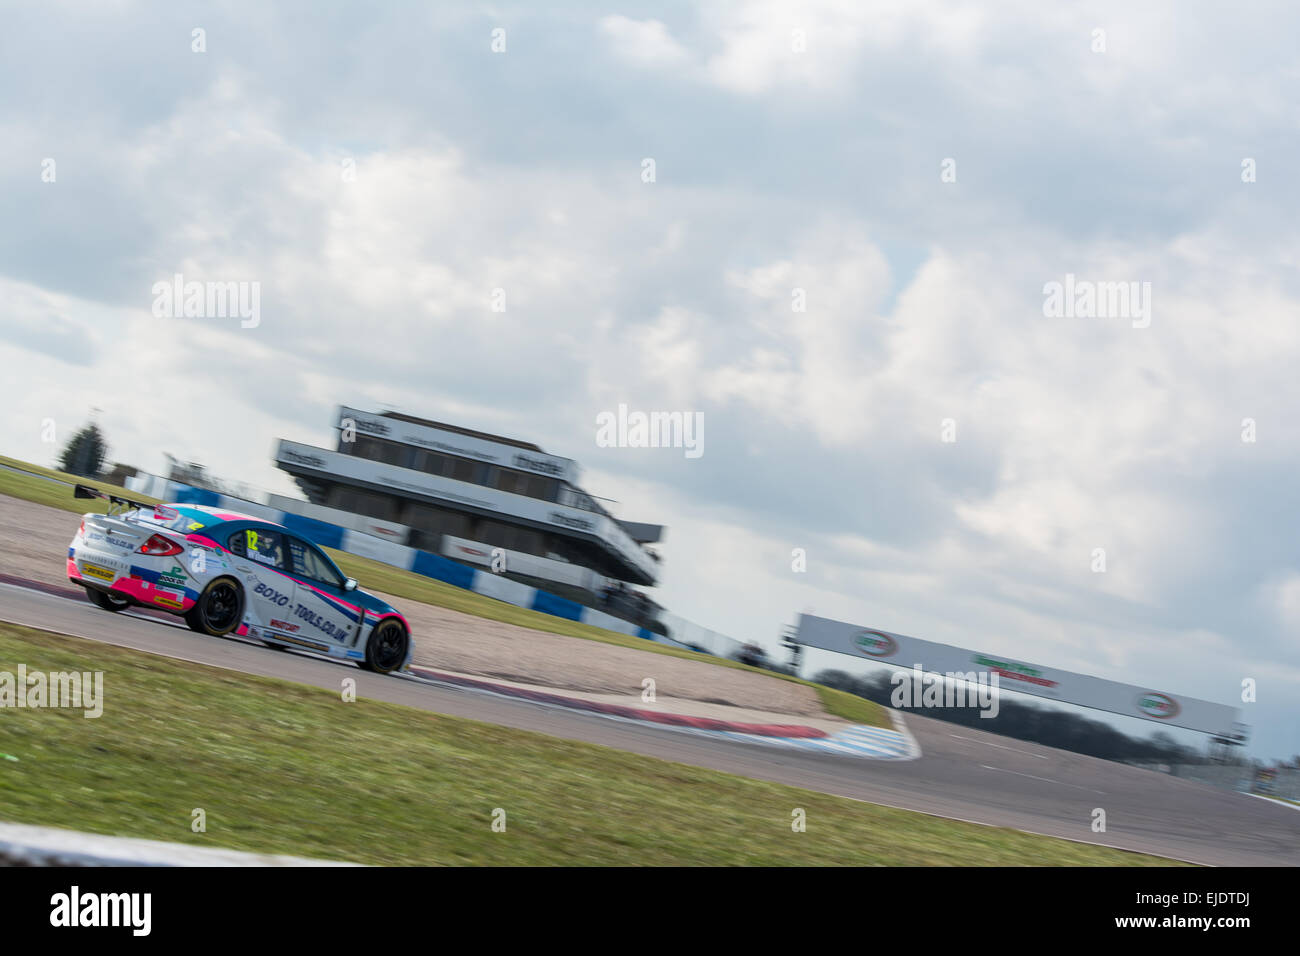 Castle Donnington, UK. 24th March, 2015. Andy Wilmot in the Welch Motorsport Proton Gen-2 in action during the 2015 Dunlop MSA British Touring Car Championship media day at Donington Park on March 24, 2015 in Castle Donington, England. Credit:  Gergo Toth/Alamy Live News Stock Photo